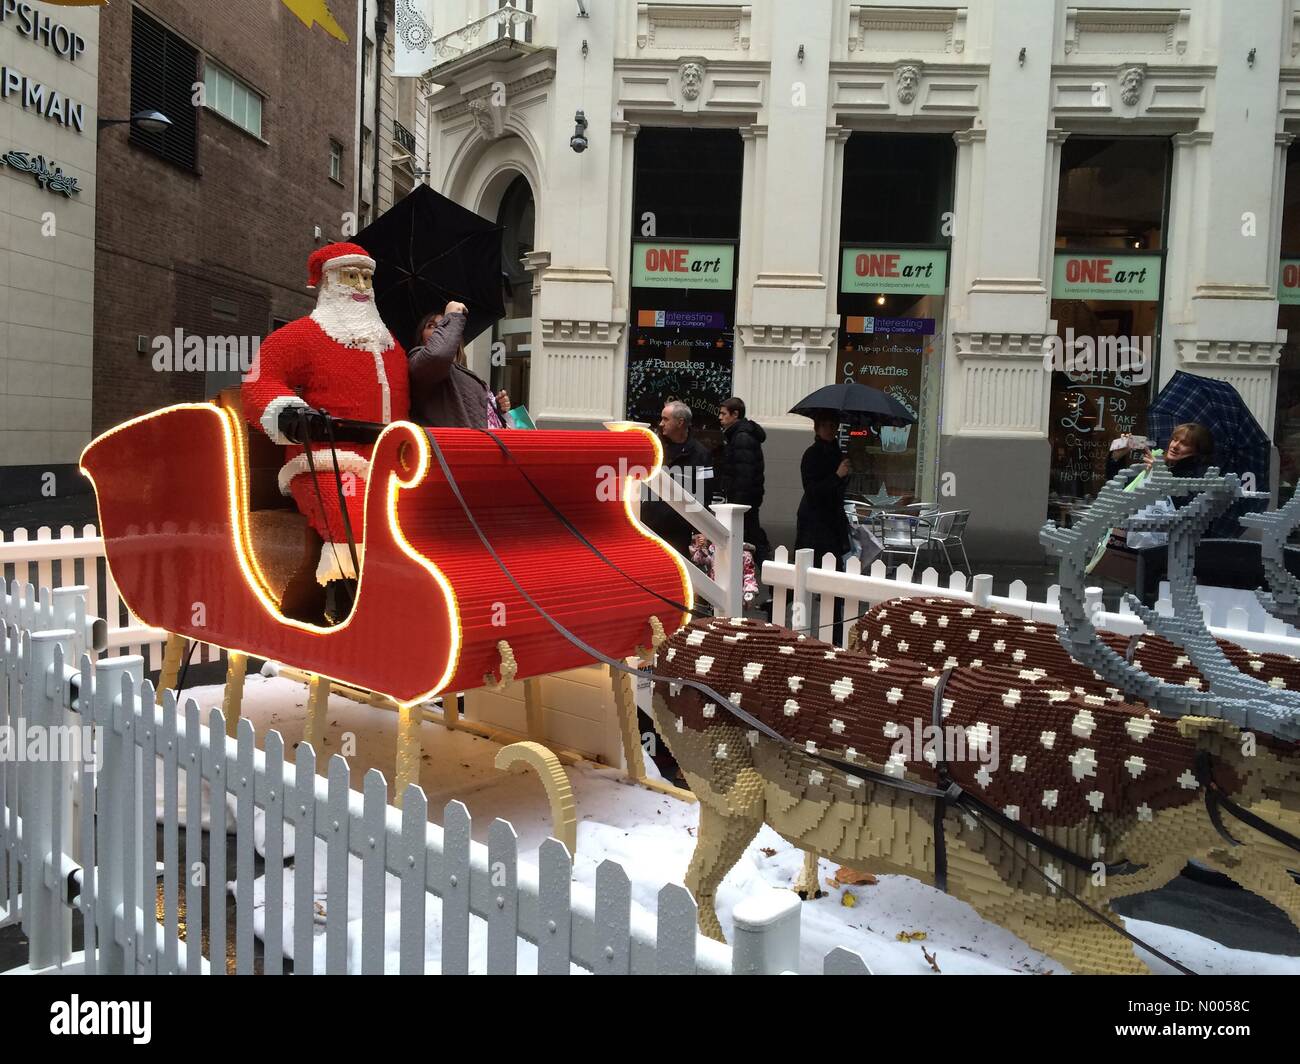 School Ln, Liverpool, Merseyside, UK. 02nd Dec, 2015. UK weather 2nd December 2015 raining on Santa in his sleigh gives a Christmas scene in early December as an umbrella is shared by a passing shopper in Liverpool UK Credit:  Jim Nicholson/StockimoNews/Alamy Live News Stock Photo